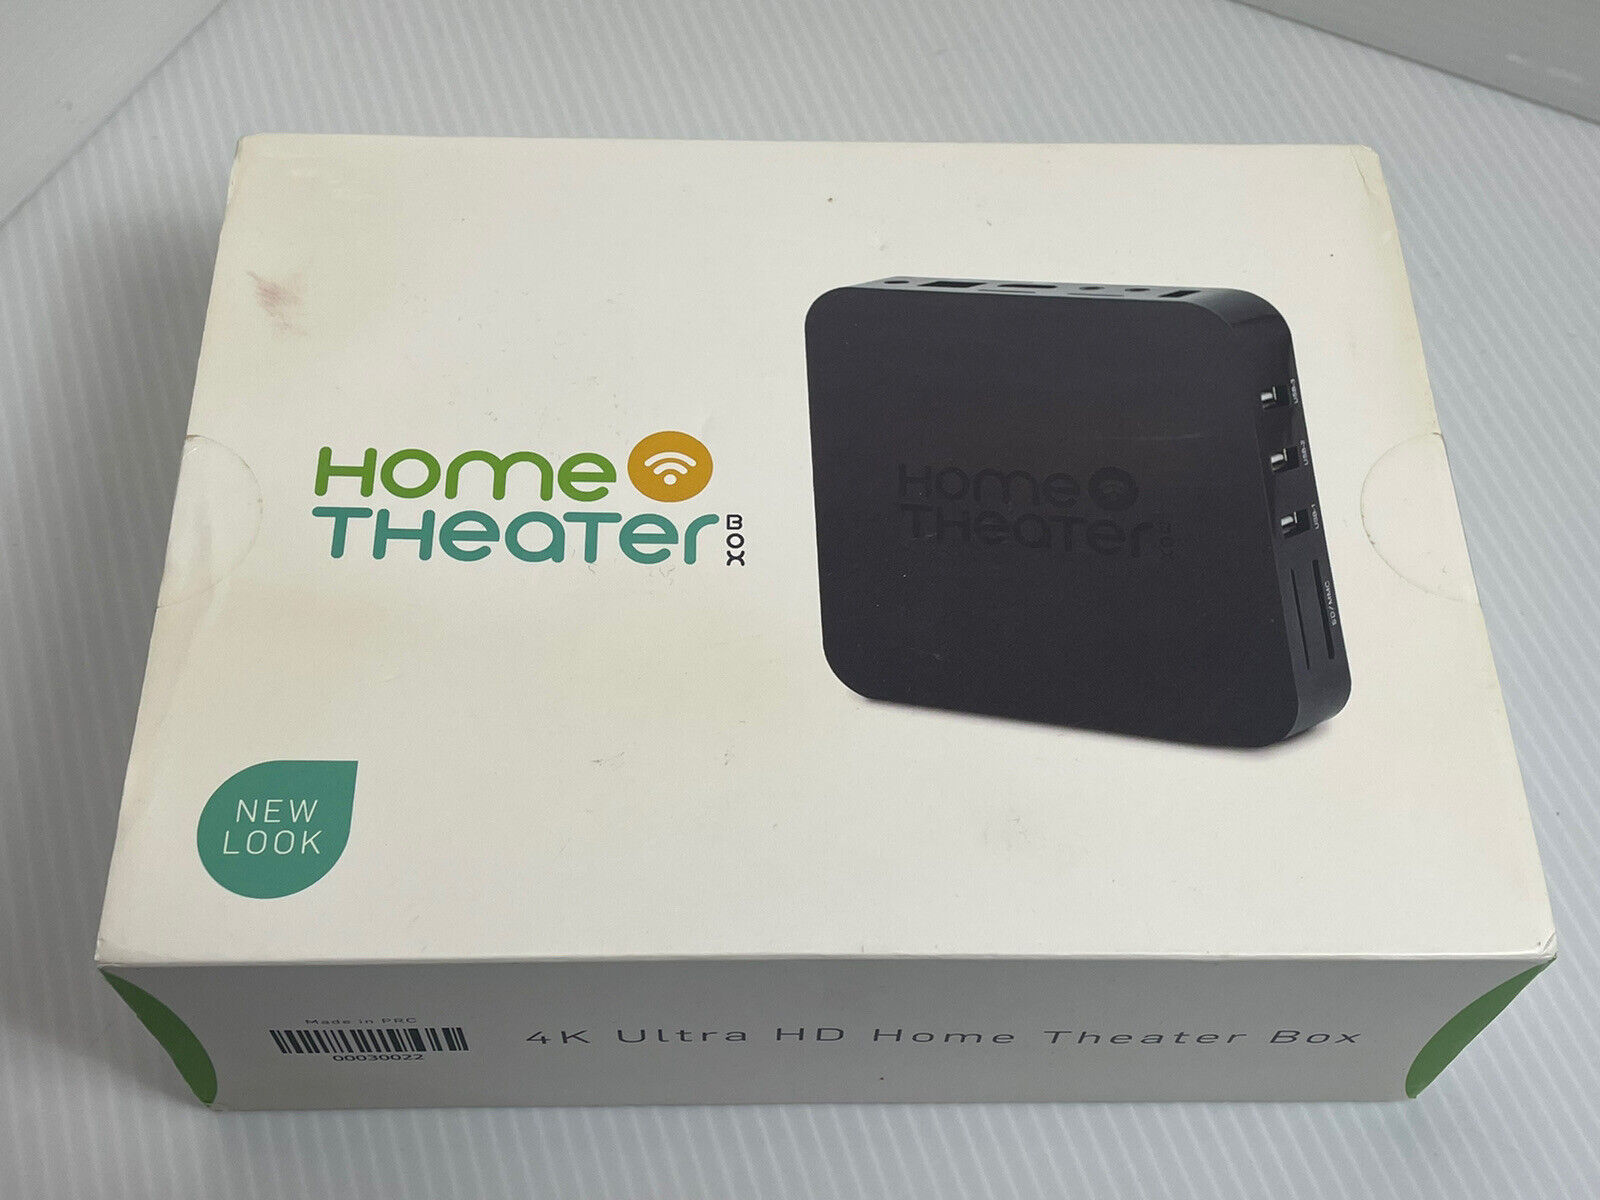 Home Theater Box 4K Ultra HD Wi-Fi HDMI 1080p Android OS